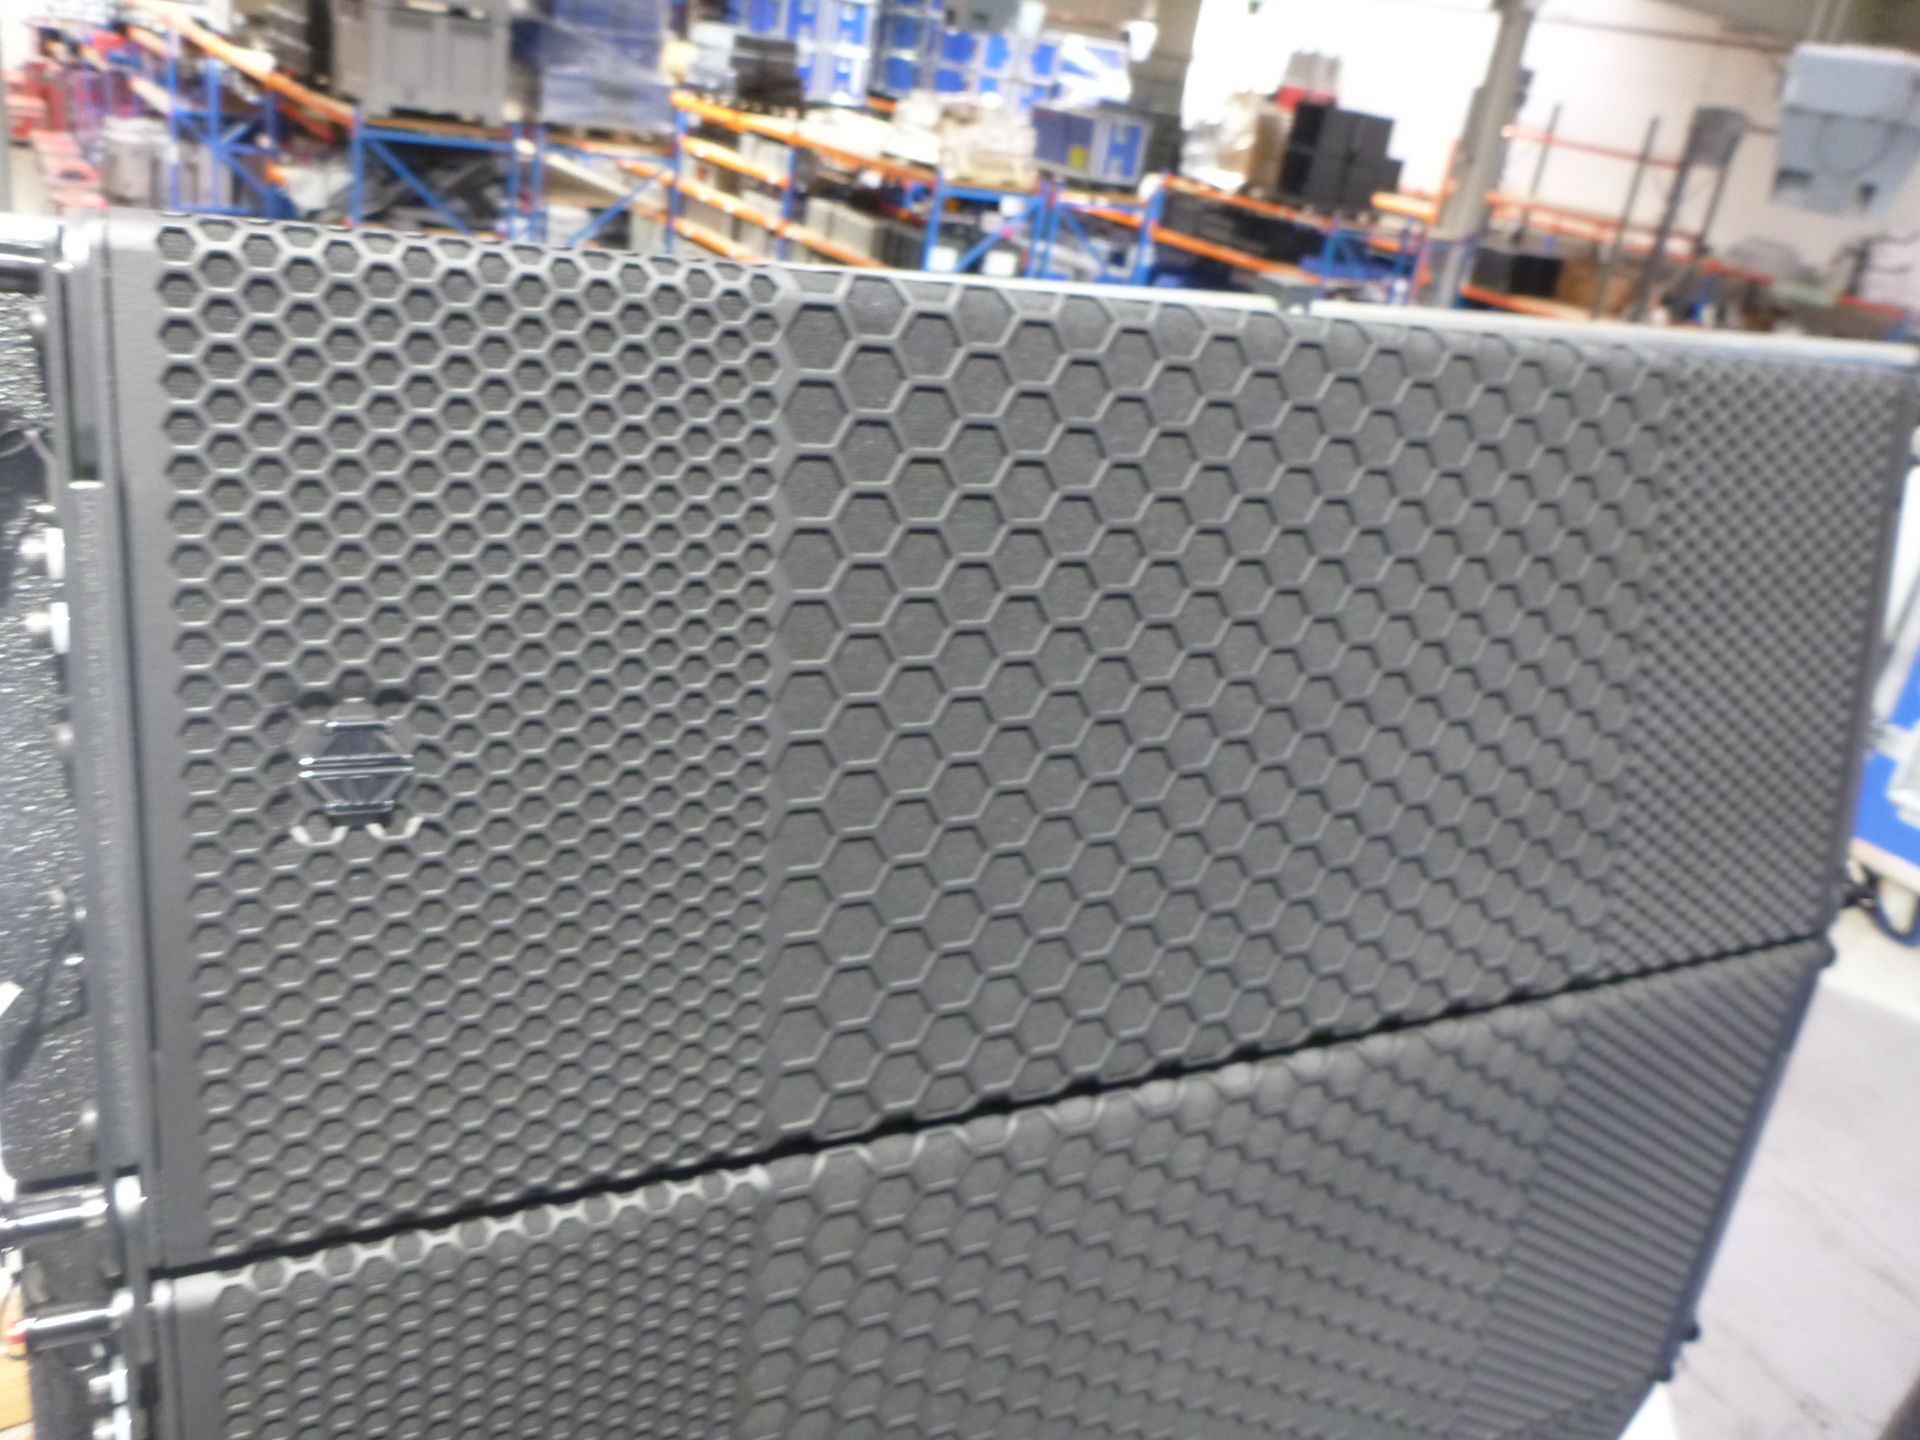 EM Acoustics Halo B Line Array Loudspeakers, Qty 4 (1 x 4) Mounted on mobile frame with padded - Image 3 of 8